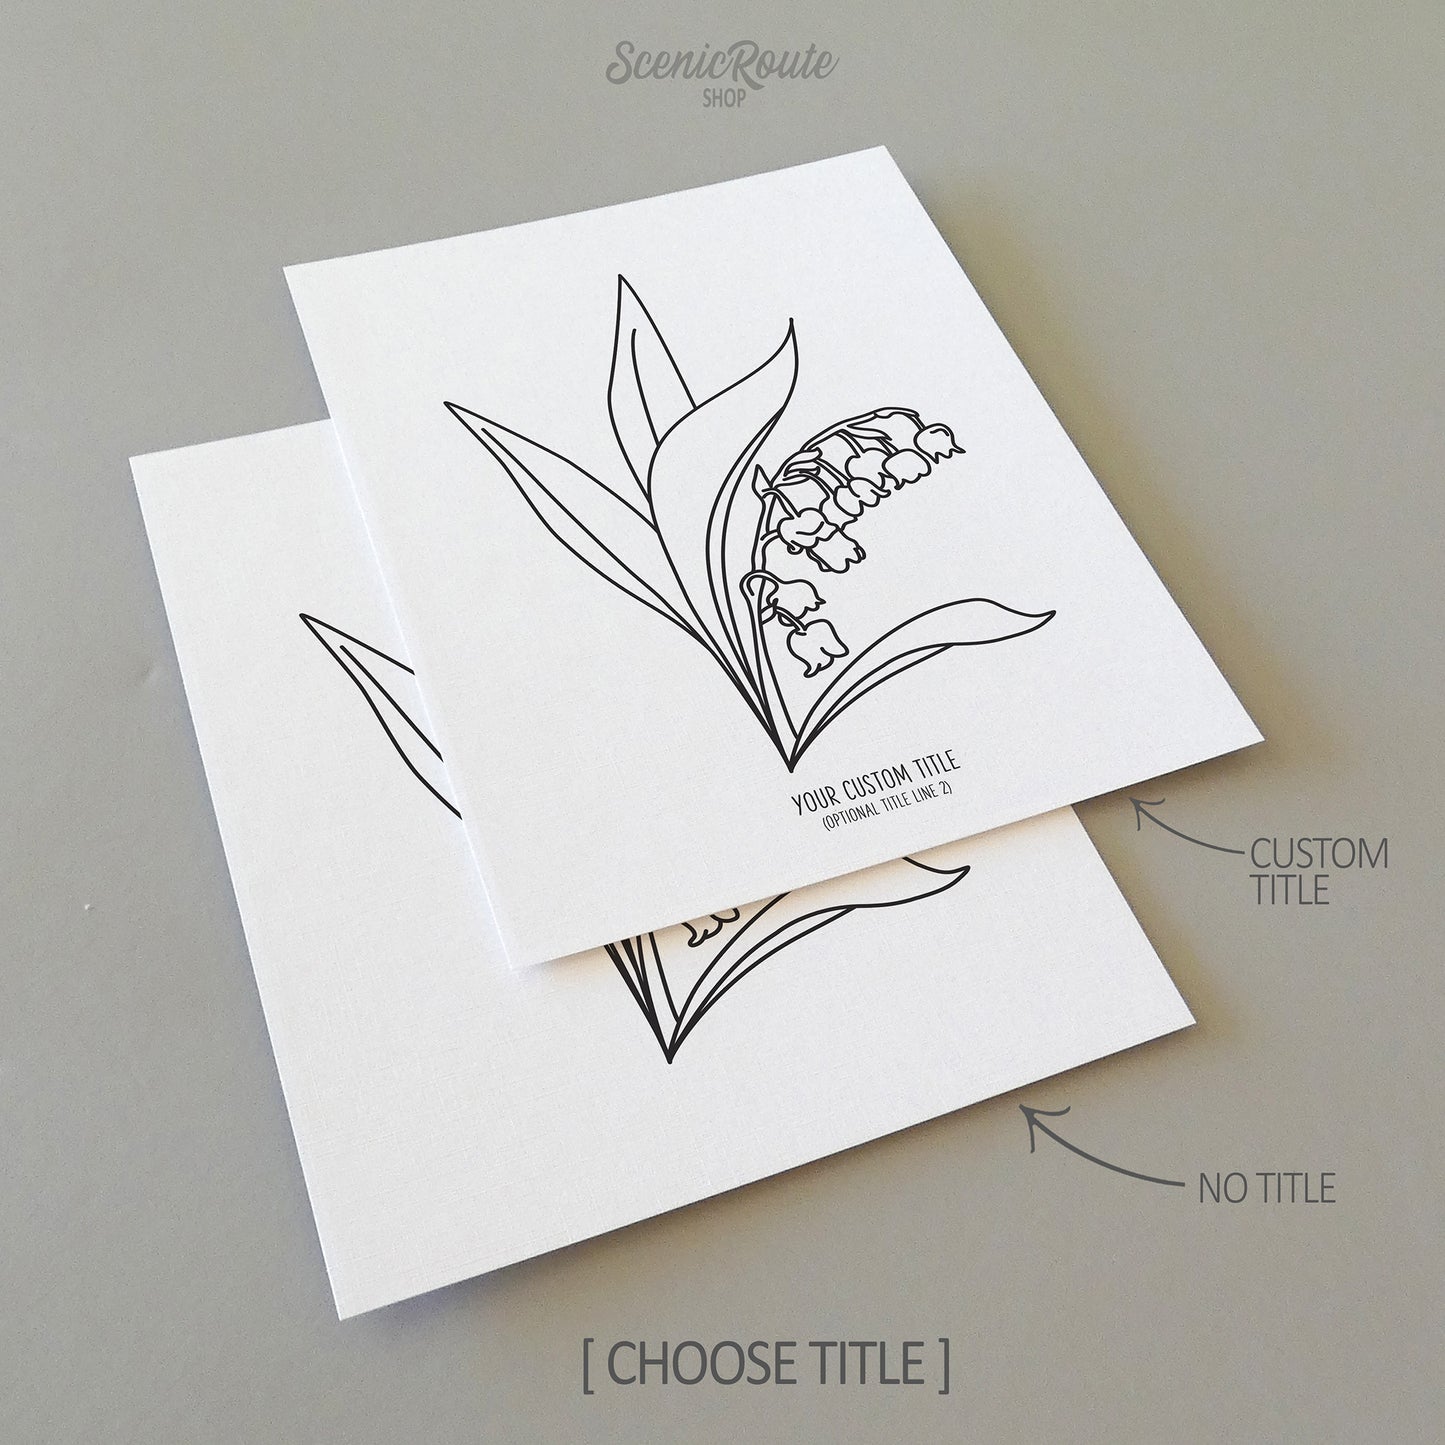 Two line art drawings of a Lily of the Valley Flower on white linen paper with a gray background.  The pieces are shown with “No Title” and “Custom Title” options for the available art print options.